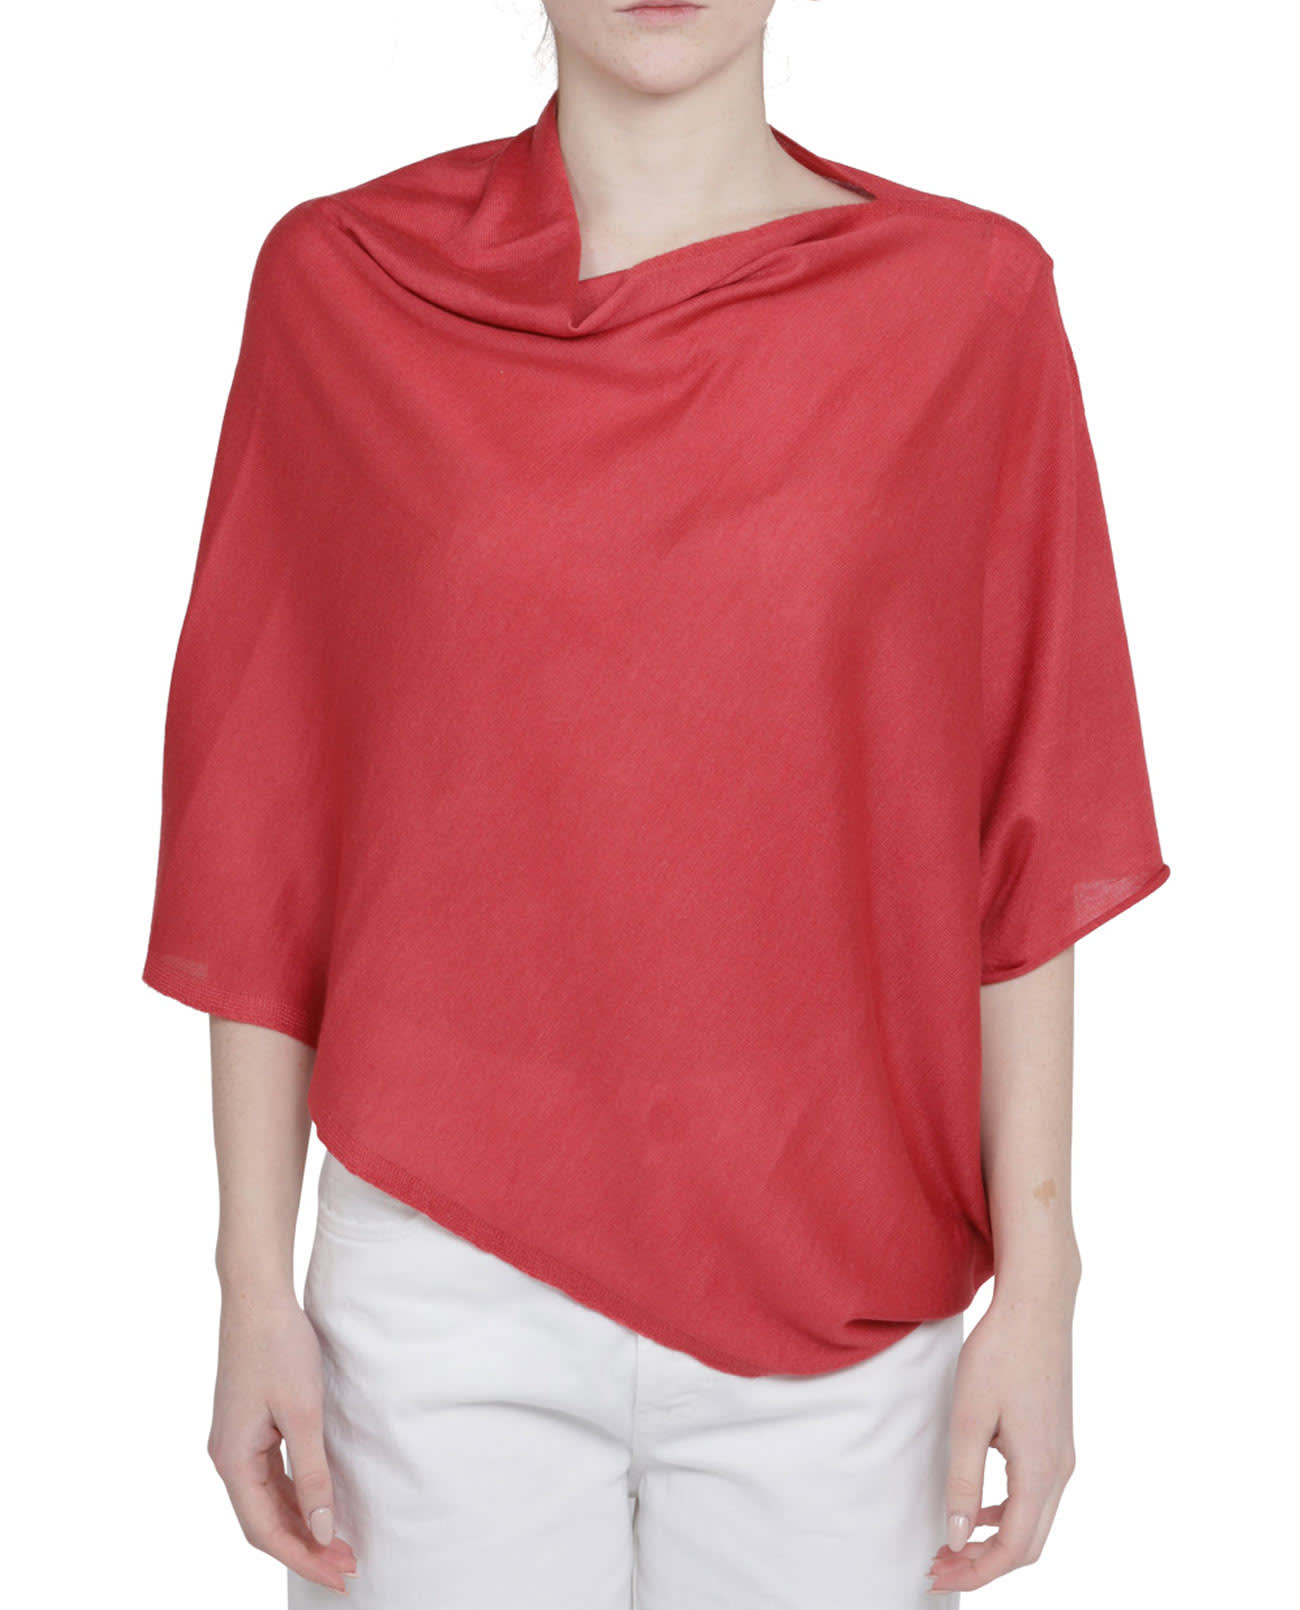 Nenah Dust Red Poncho Top